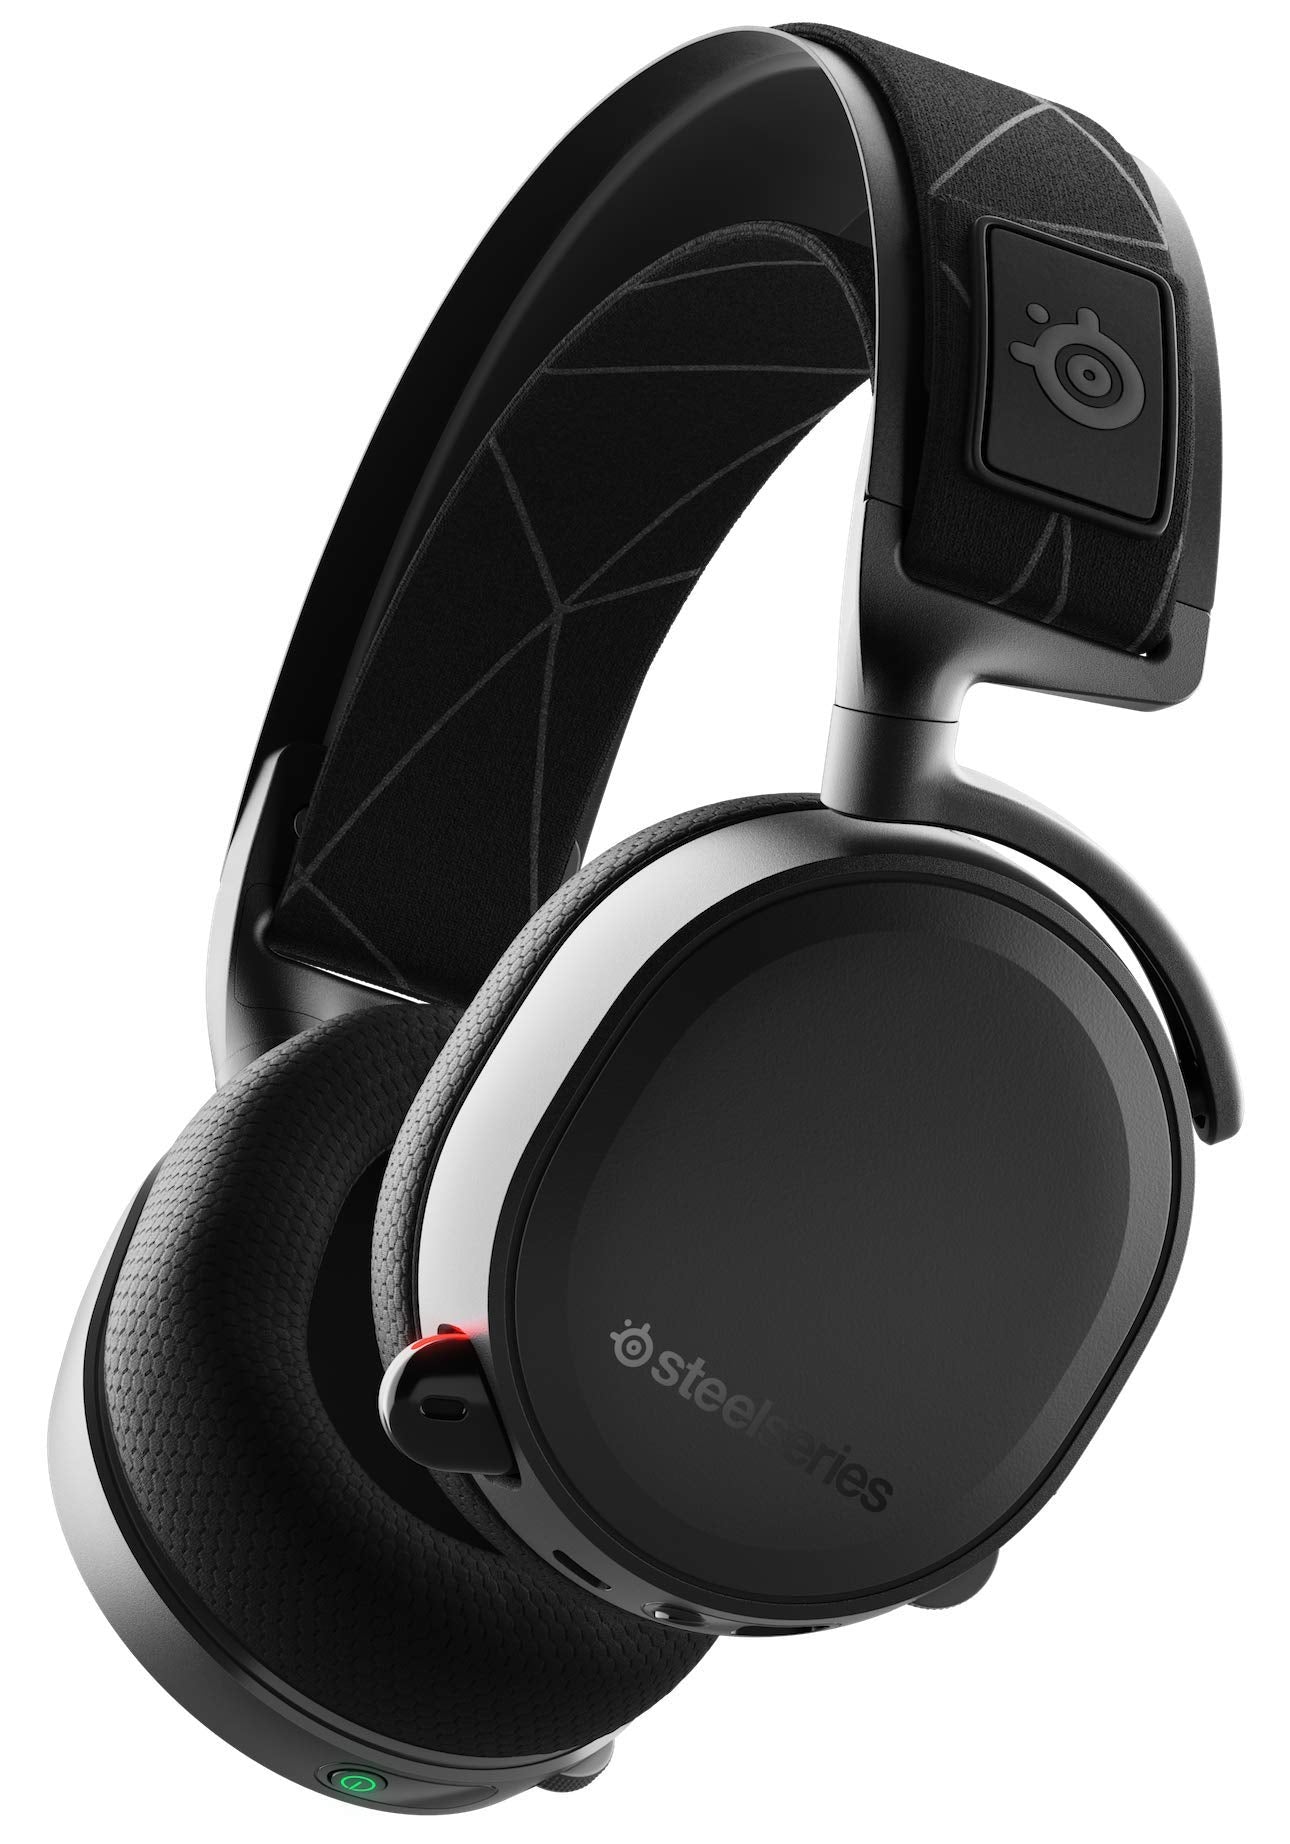 SteelSeries Arctis 7 Wireless Gaming Headset - DTS Headphone: X v2.0 Surround for PC and PlayStation 5, PS4 - Black